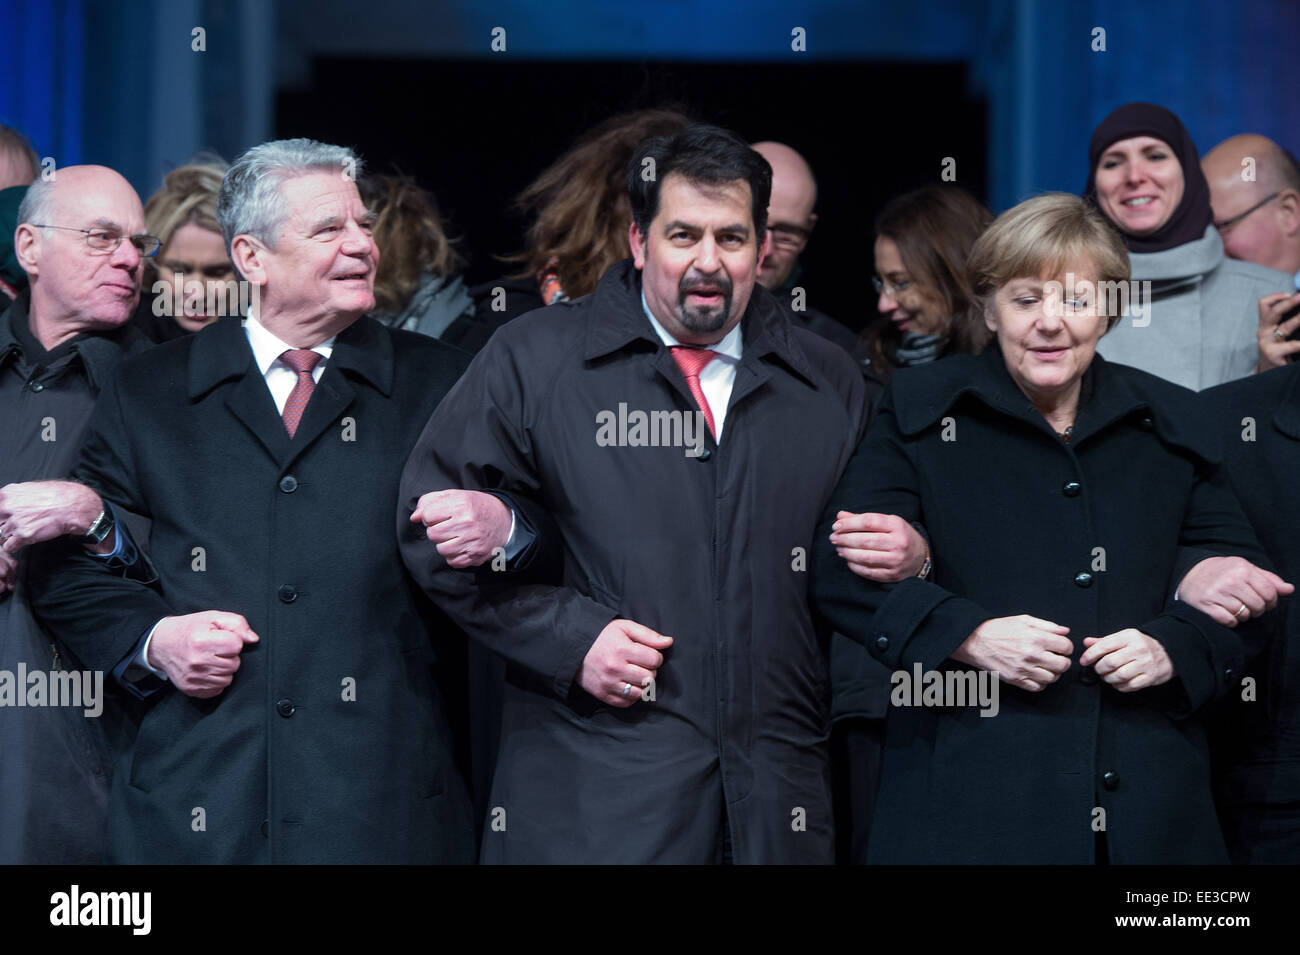 Berlin, Germany. 13th Jan, 2015. President of the Bundestag, Norbert Lammer (L-R), German President Joachim Gauck, chairman of the Central Committee of Muslims in Germany, Aiman Mazyek, and Chancellor Angela Merkel attend a vigil for the victims of the attacks in France at the Brandenburg Gate in Berlin, Germany, 13 January 2015. The Central Committee of Muslims and the Turkish community have invoked the slogan 'Stand together - Show face' for the rally against Islamist terror and for the peaceful co-existence of the religions. Photo: MAURIZIO GAMBARINI/dpa/Alamy Live News Stock Photo